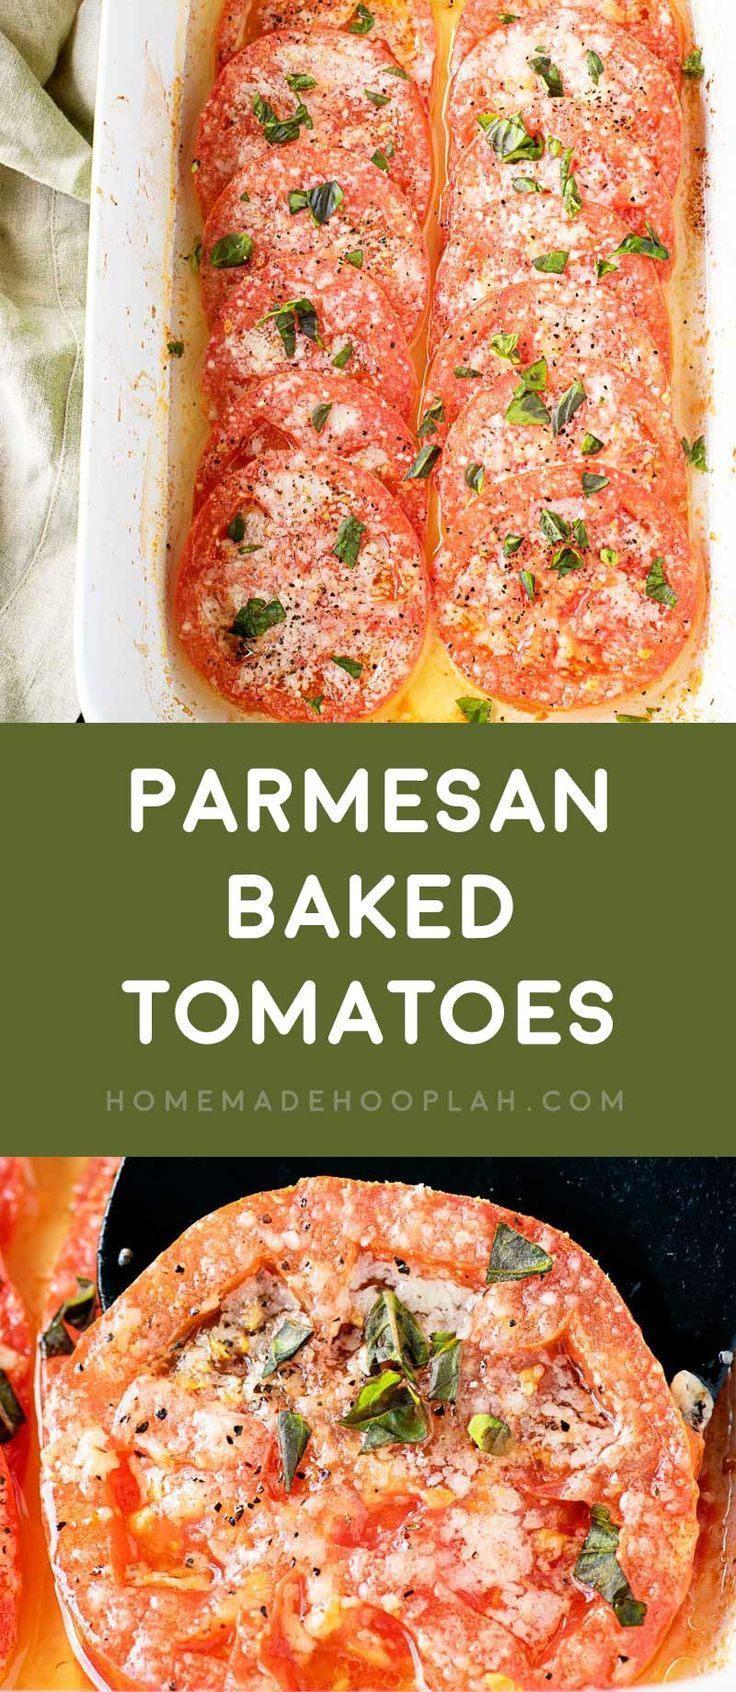 Parmesan Baked Tomatoes! If you’re craving pizza but not the calories, this easy baked tomato dish is like a pizza without the